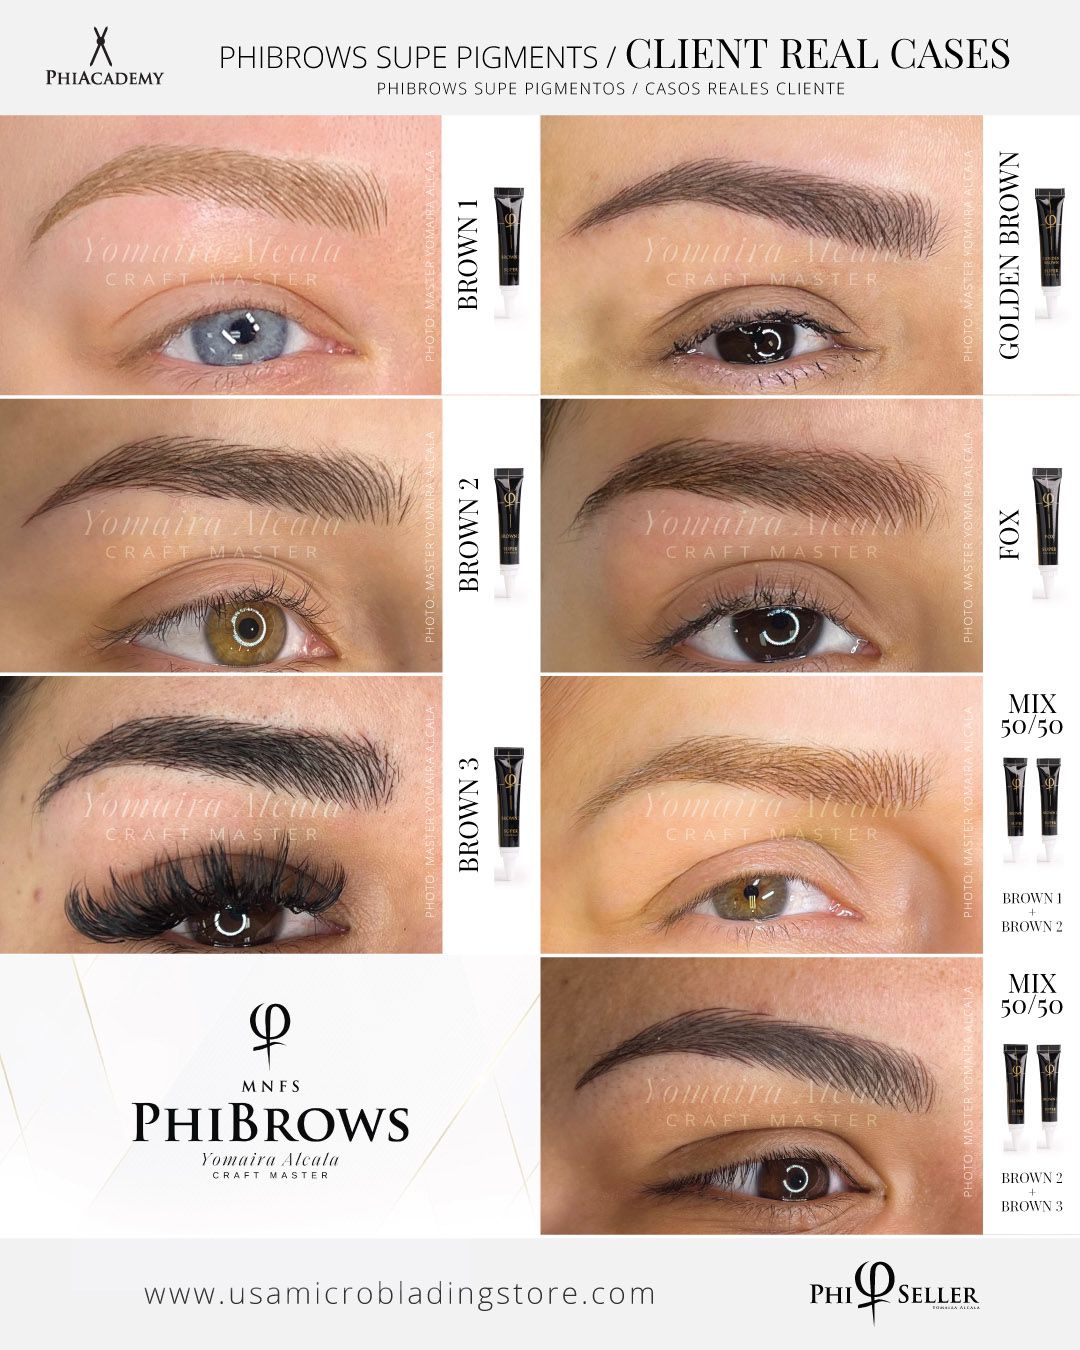 PHIBROWS BROWN 3 SUPER